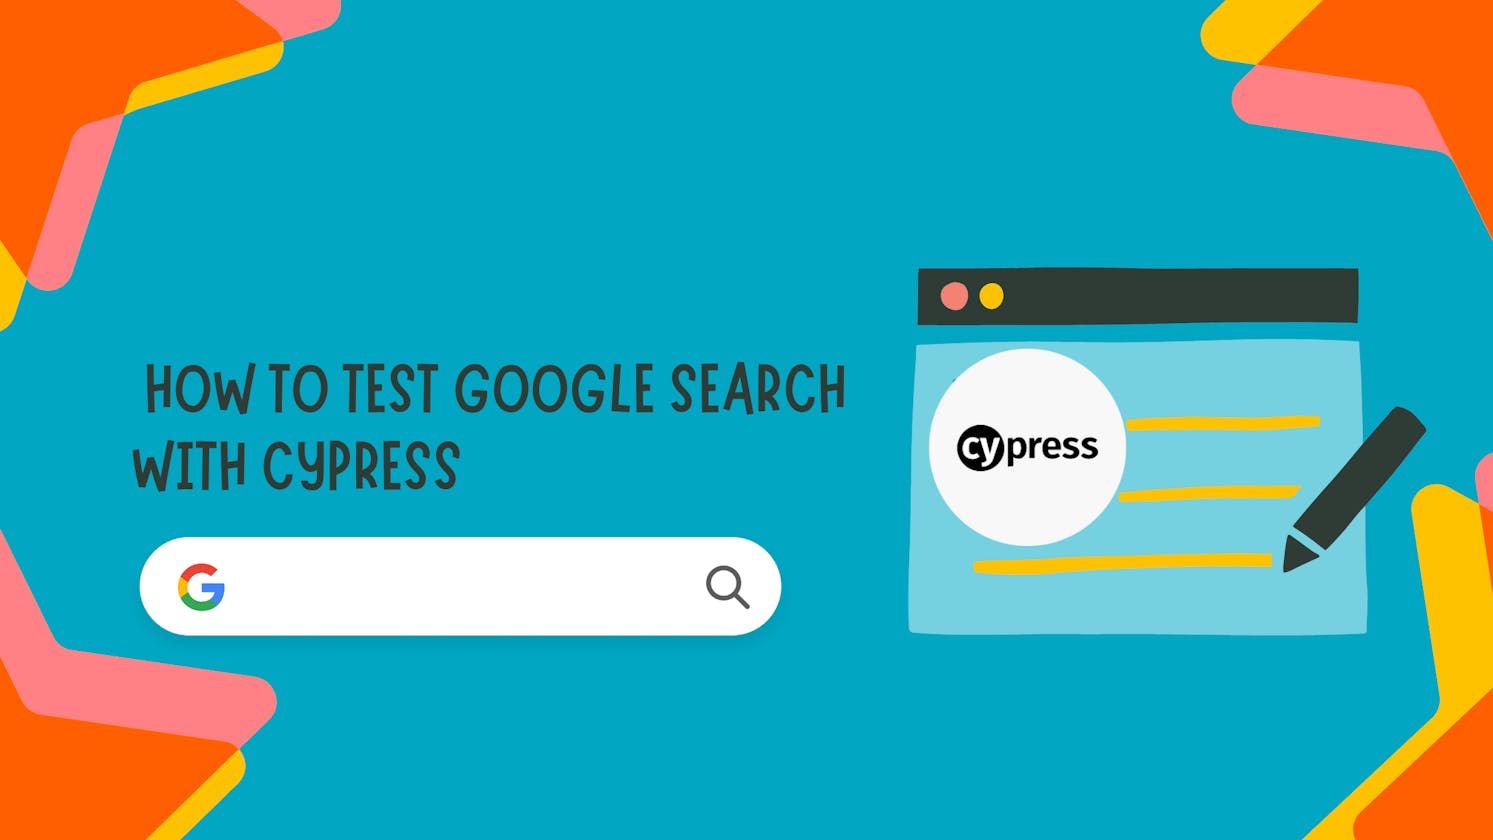 🧪 How to Test Google Search with Cypress 🕵️‍♀️